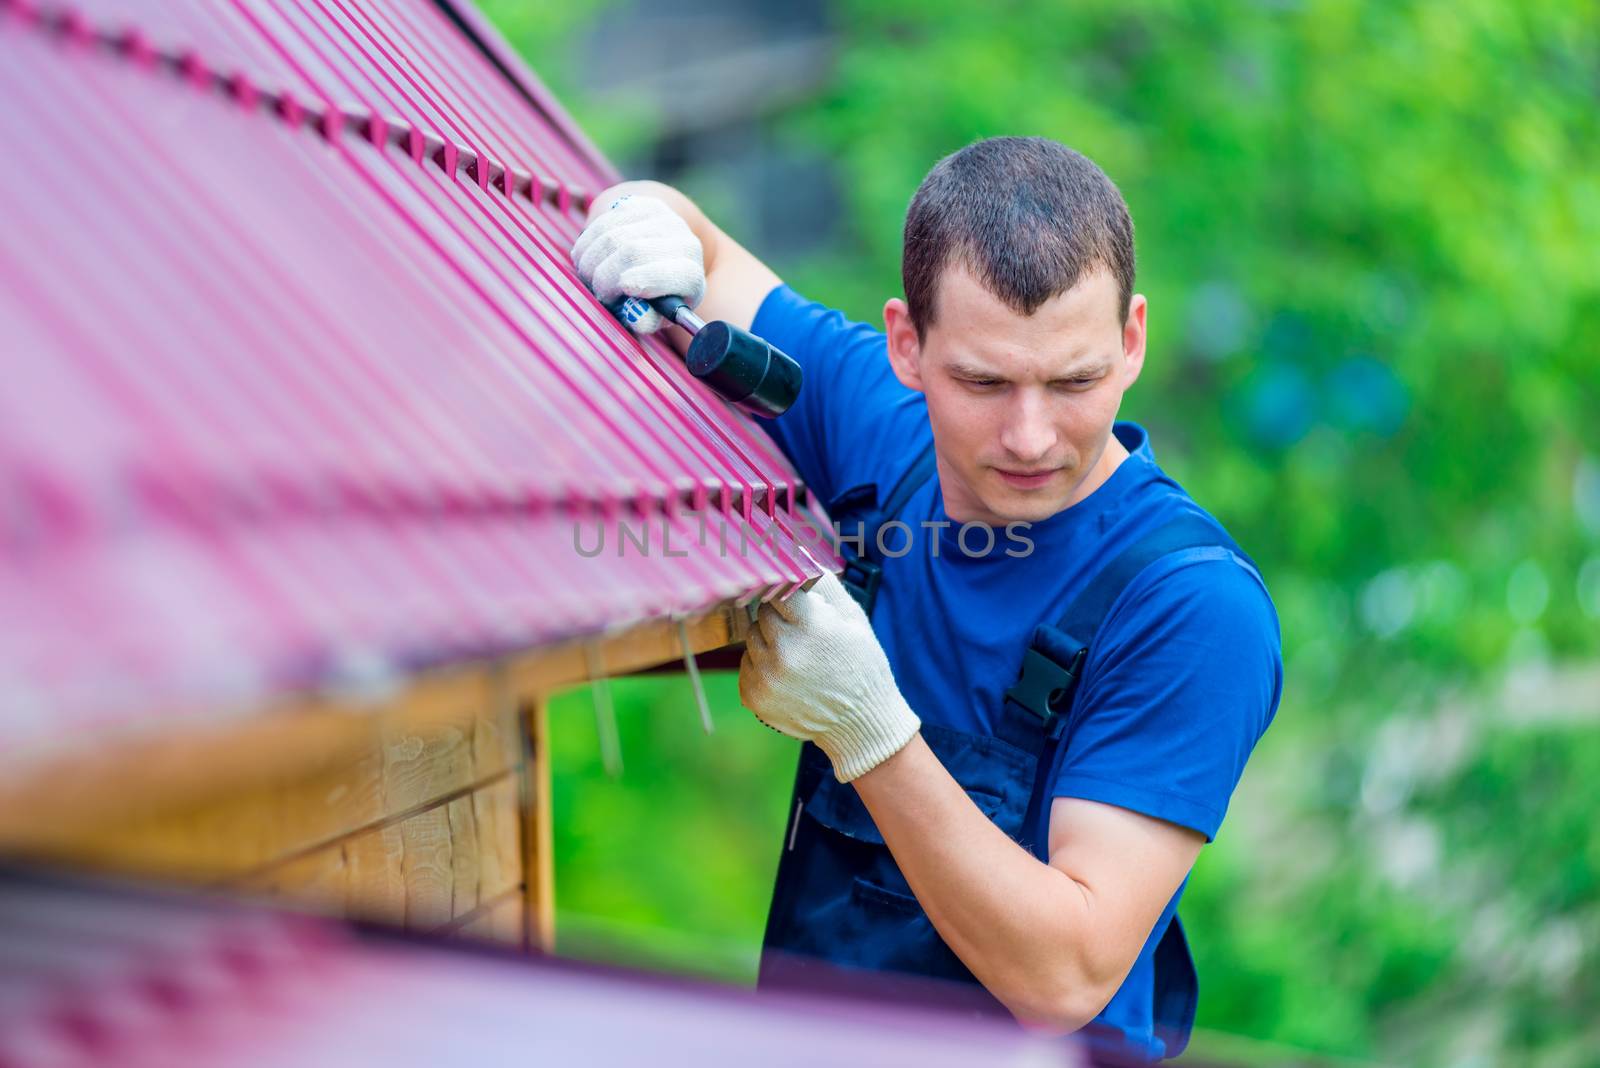 a man with a hammer repairs the roof of a house, shooting outdoo by kosmsos111